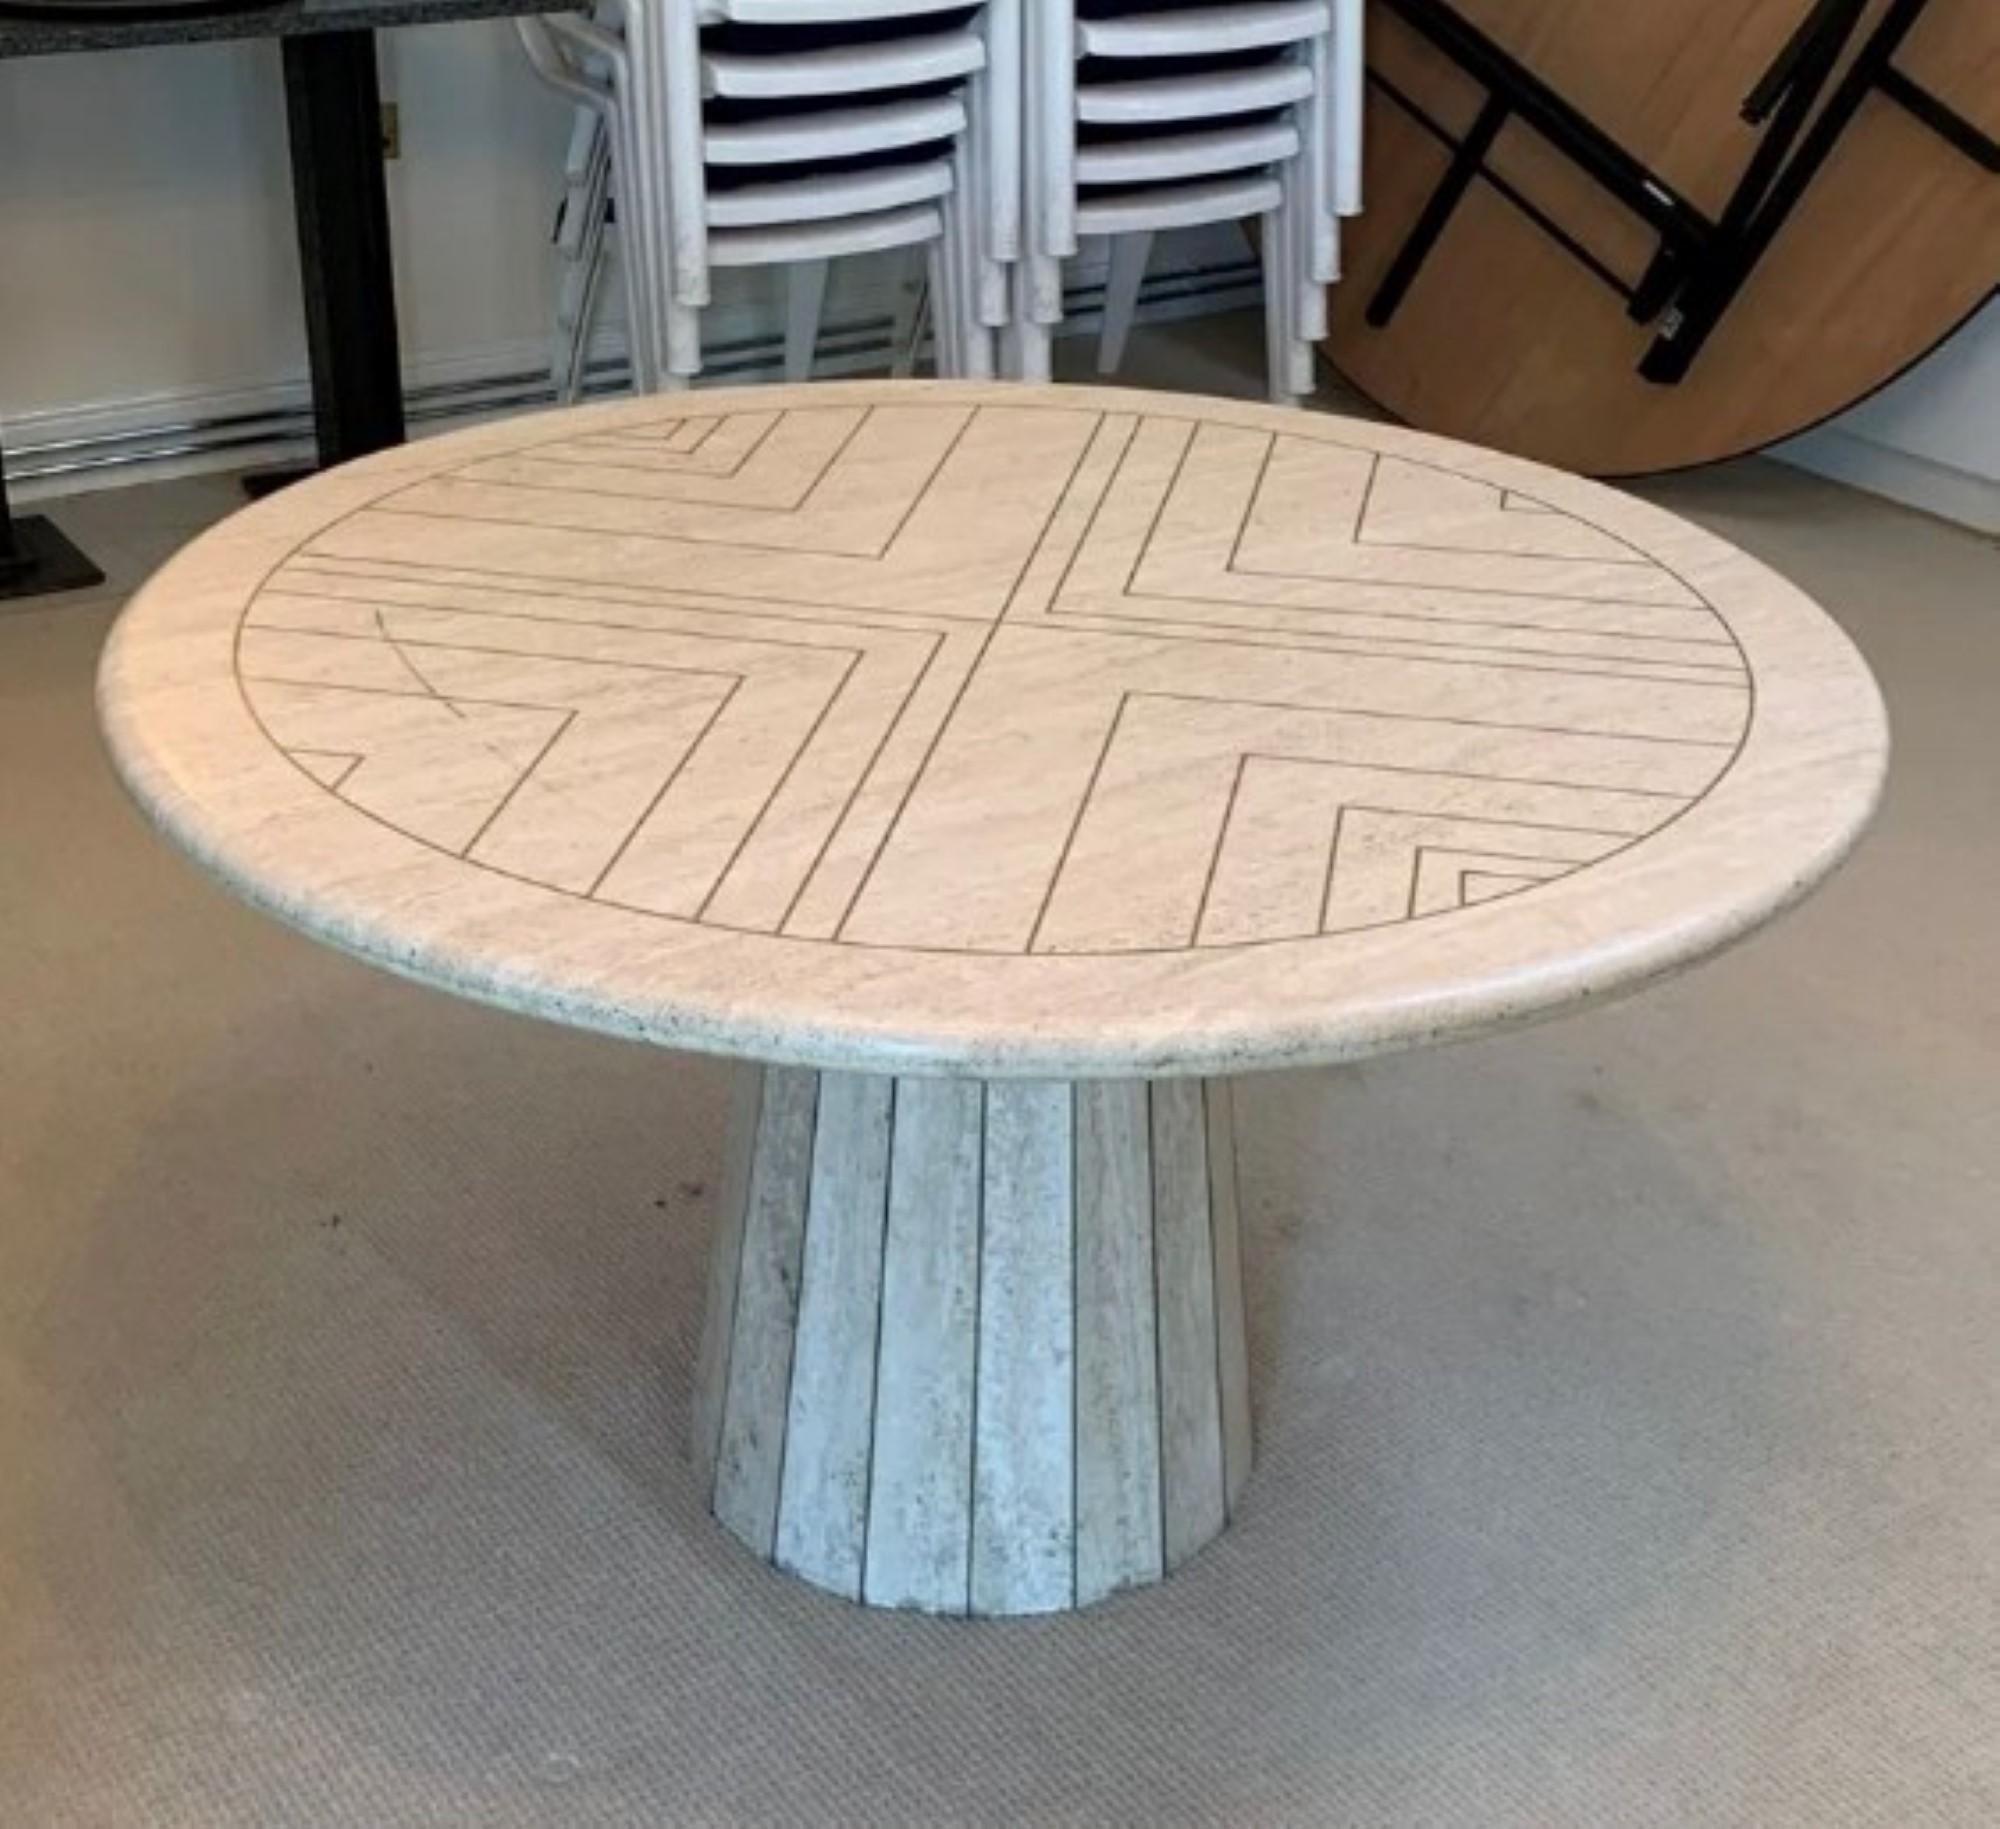 Magnificent Travertine Round Dining Table with Brass Inlay, Attributed to Willy Rizzo, Italian, 1970s

Rare and absolutely beautiful dining table attributed to Willy Rizzo. The top of the table has a beautiful solid brass arrow pattern inlaid into